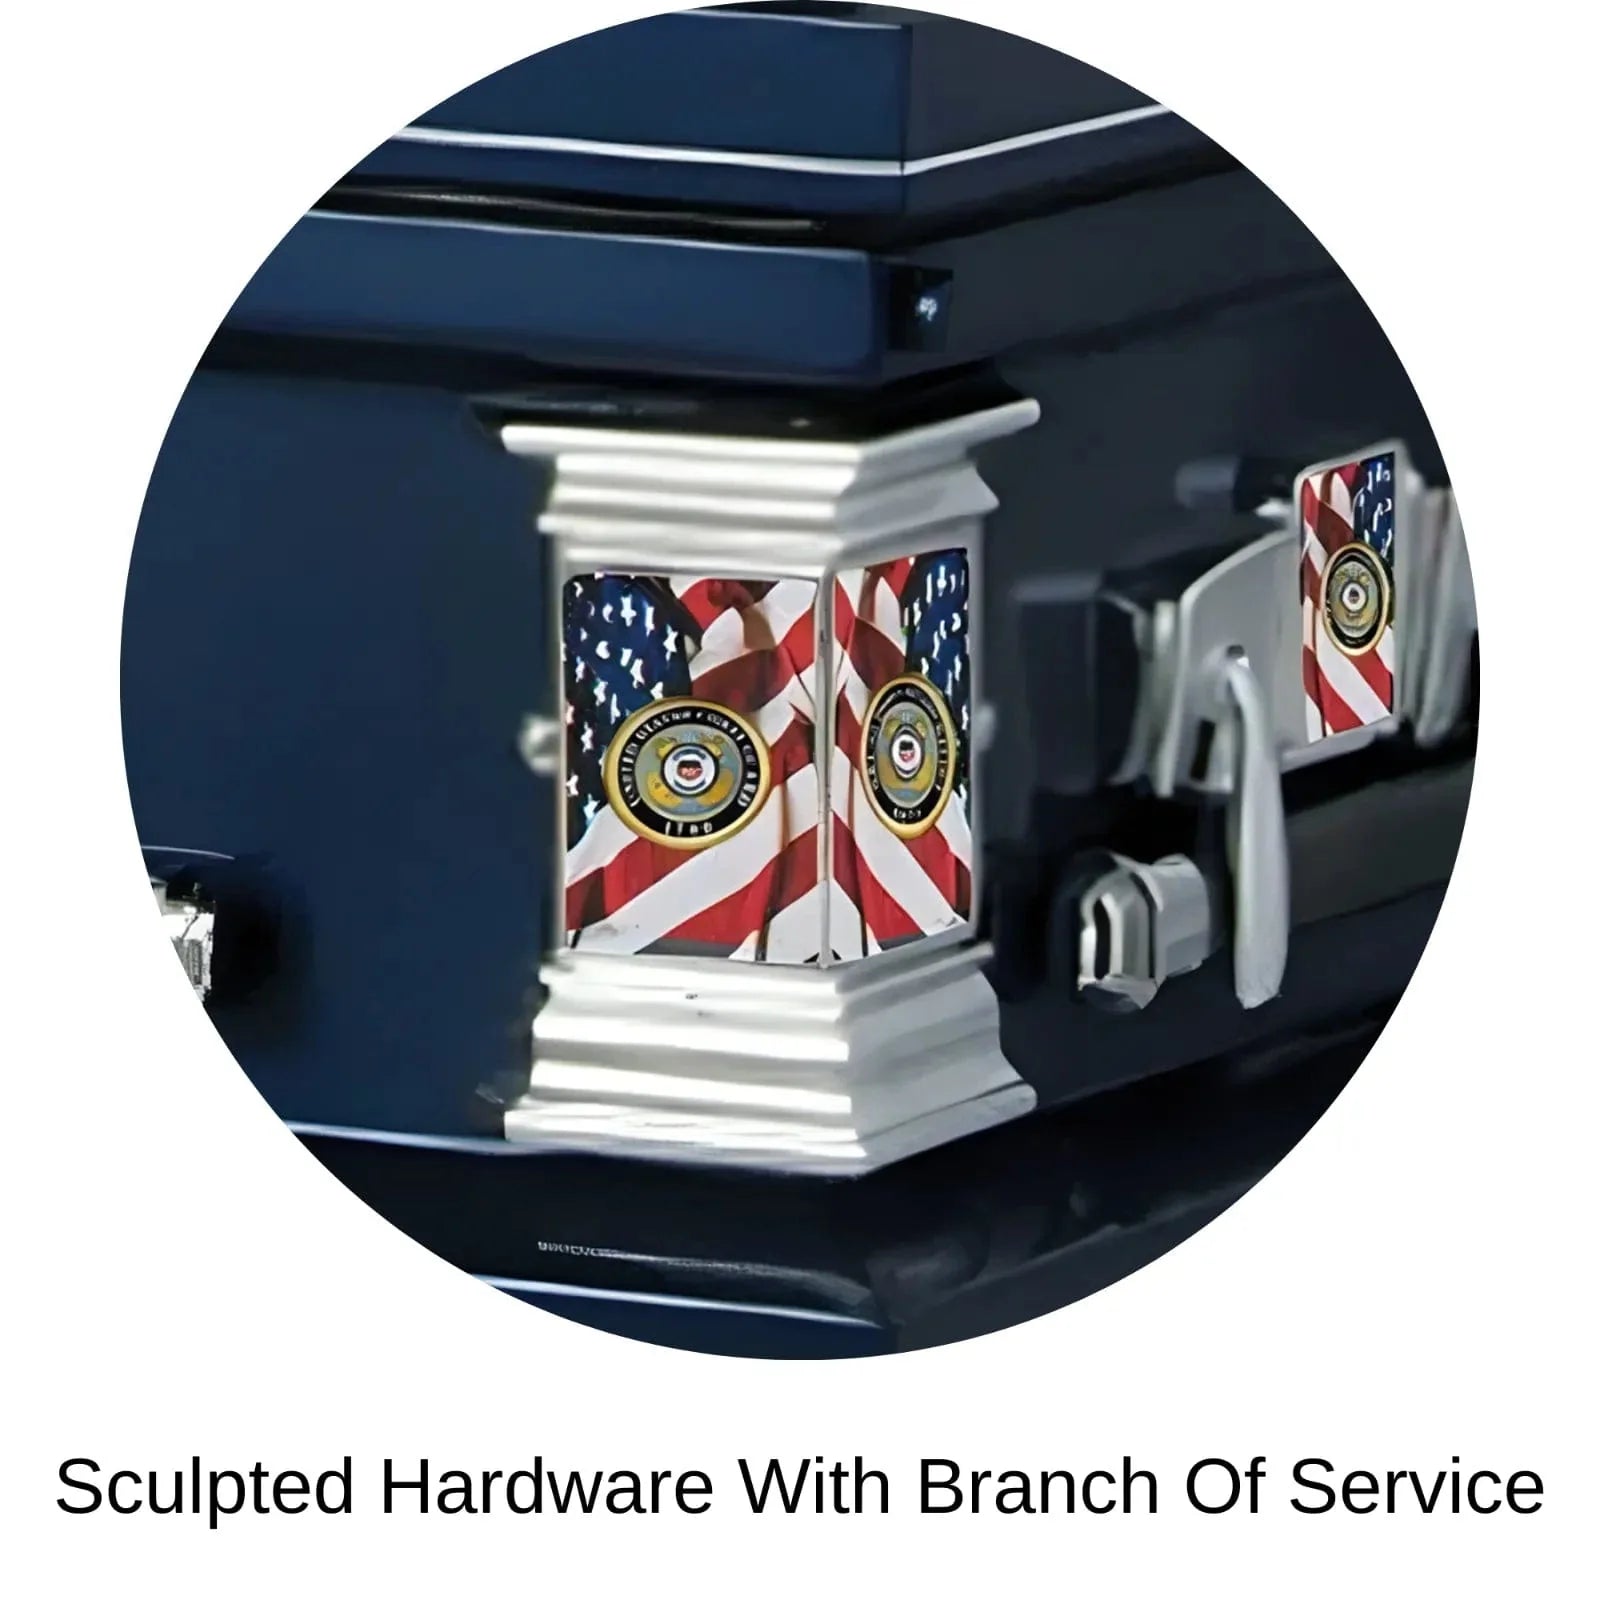 Coast Guard Casketm | Sculpted Hardware with Branch of Service